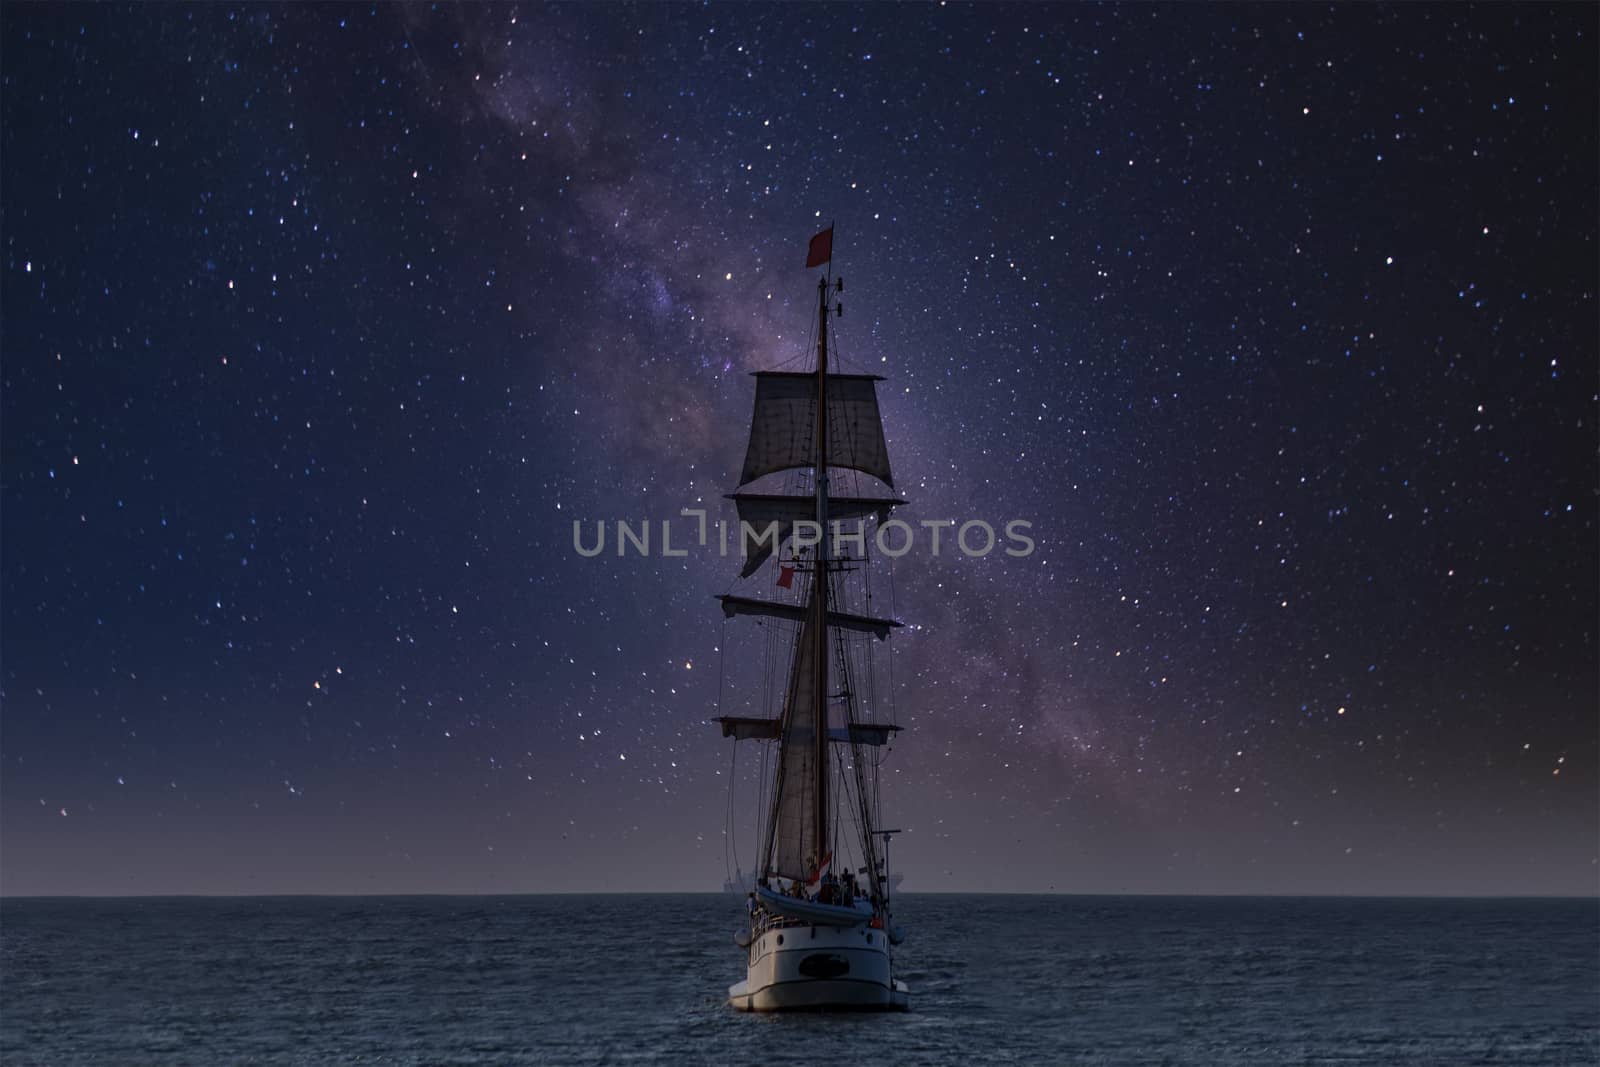 Antique tall ship, vessel leaving the harbor of The Hague, Scheveningen under a clear milky way sky